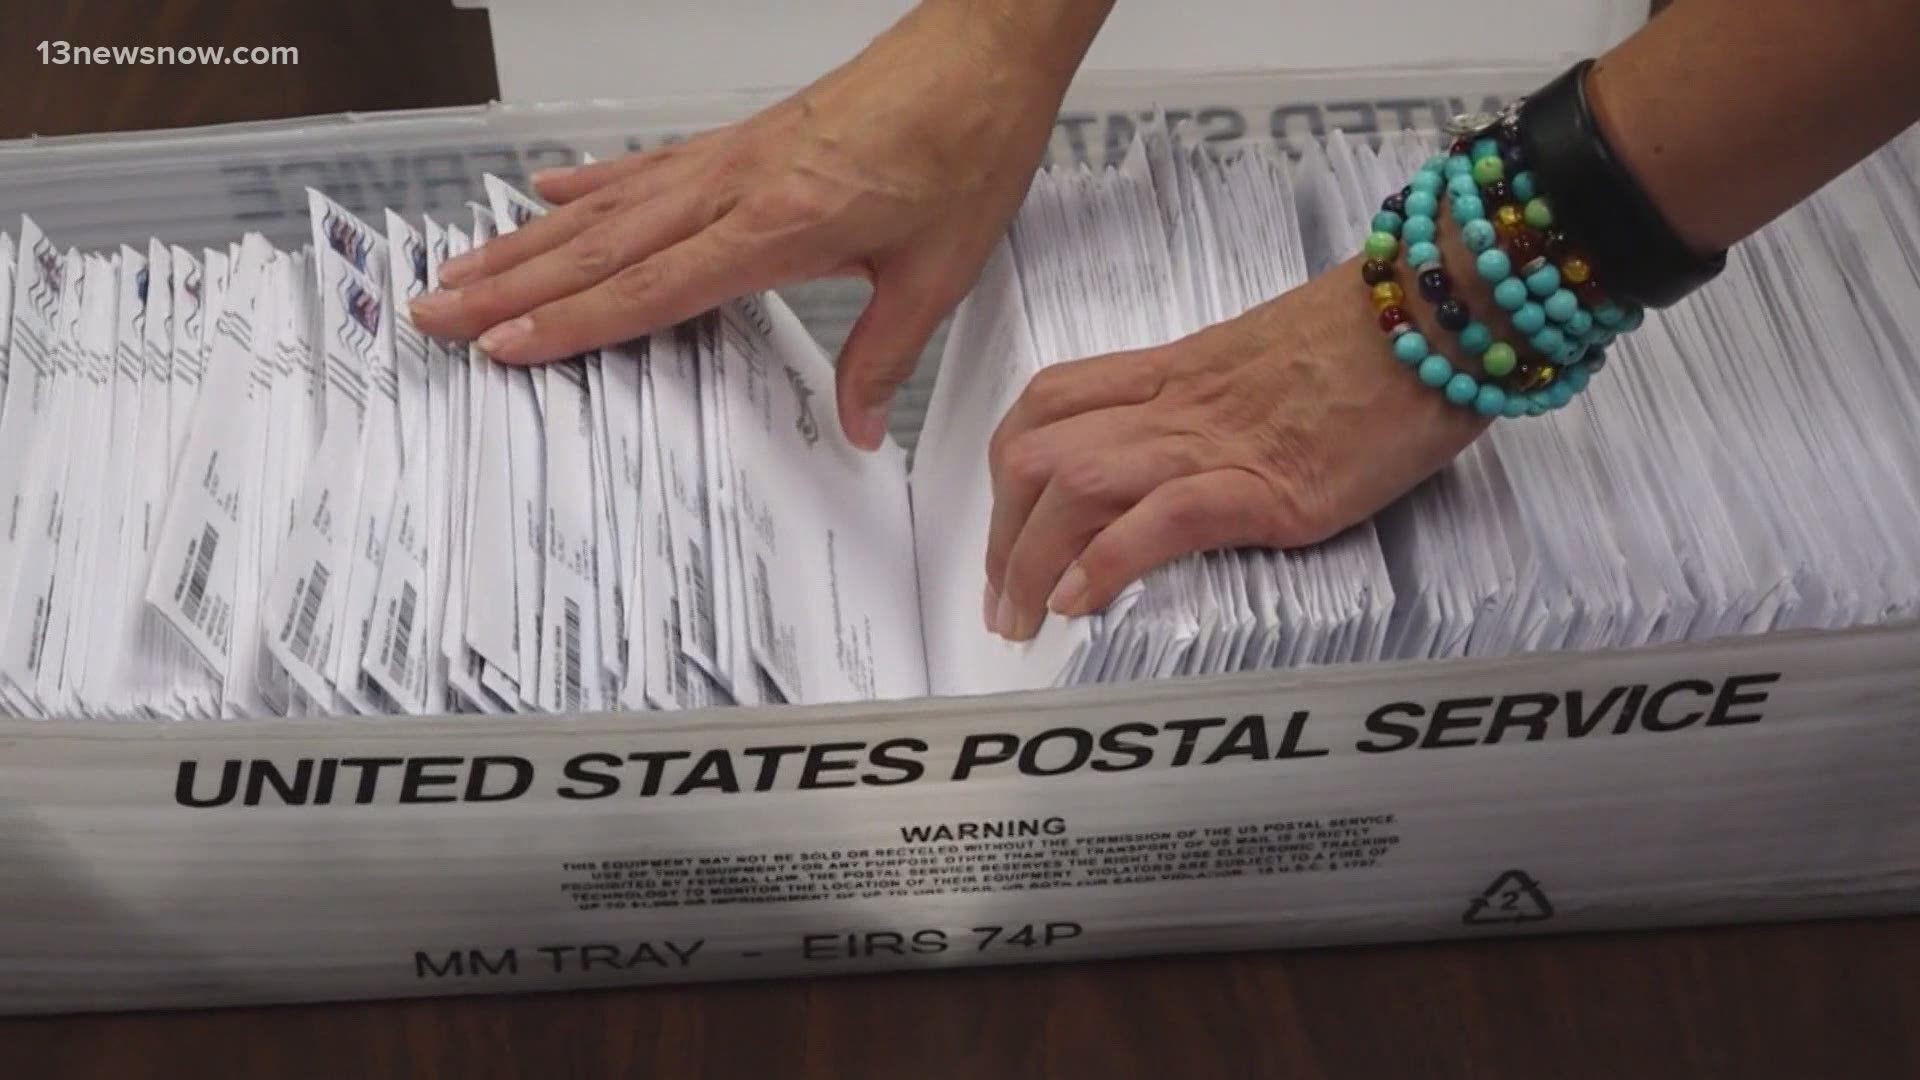 13News Now's Voter Access Team went behind the scenes in Virginia Beach to show the process of receiving, sorting, opening, and counting absentee ballots.